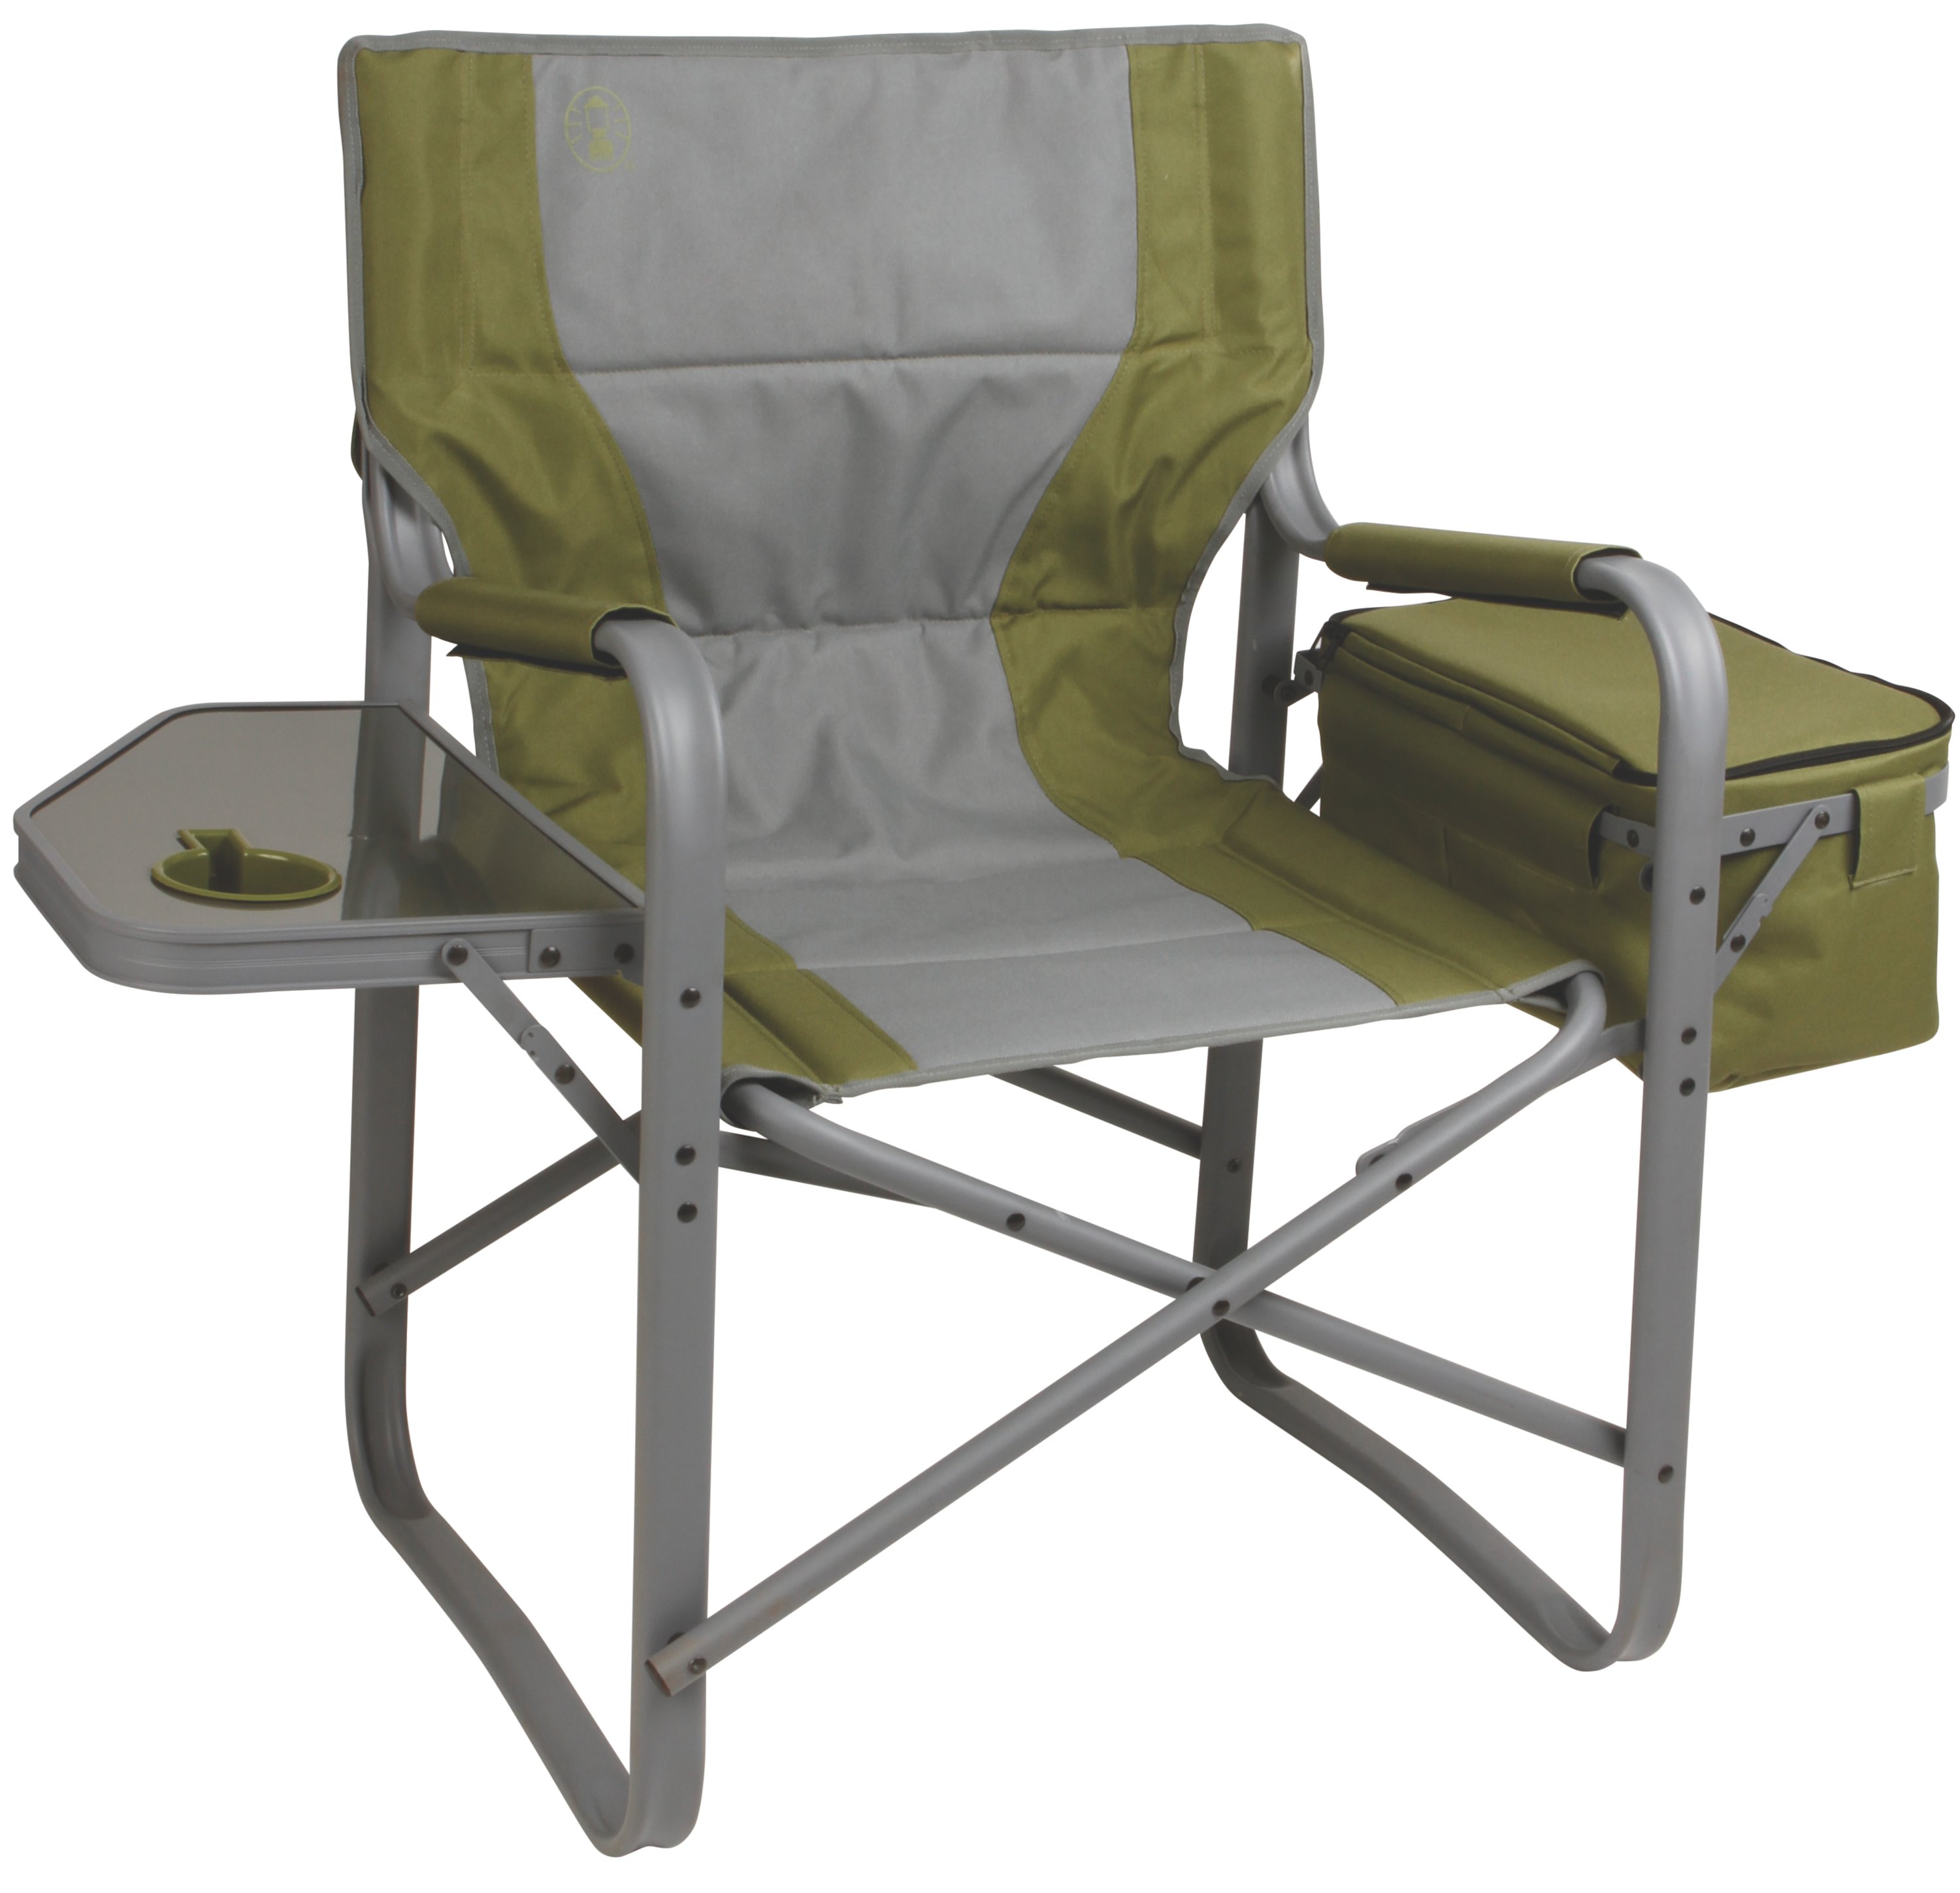 Coleman Directors Camp Chair XL with Cooler